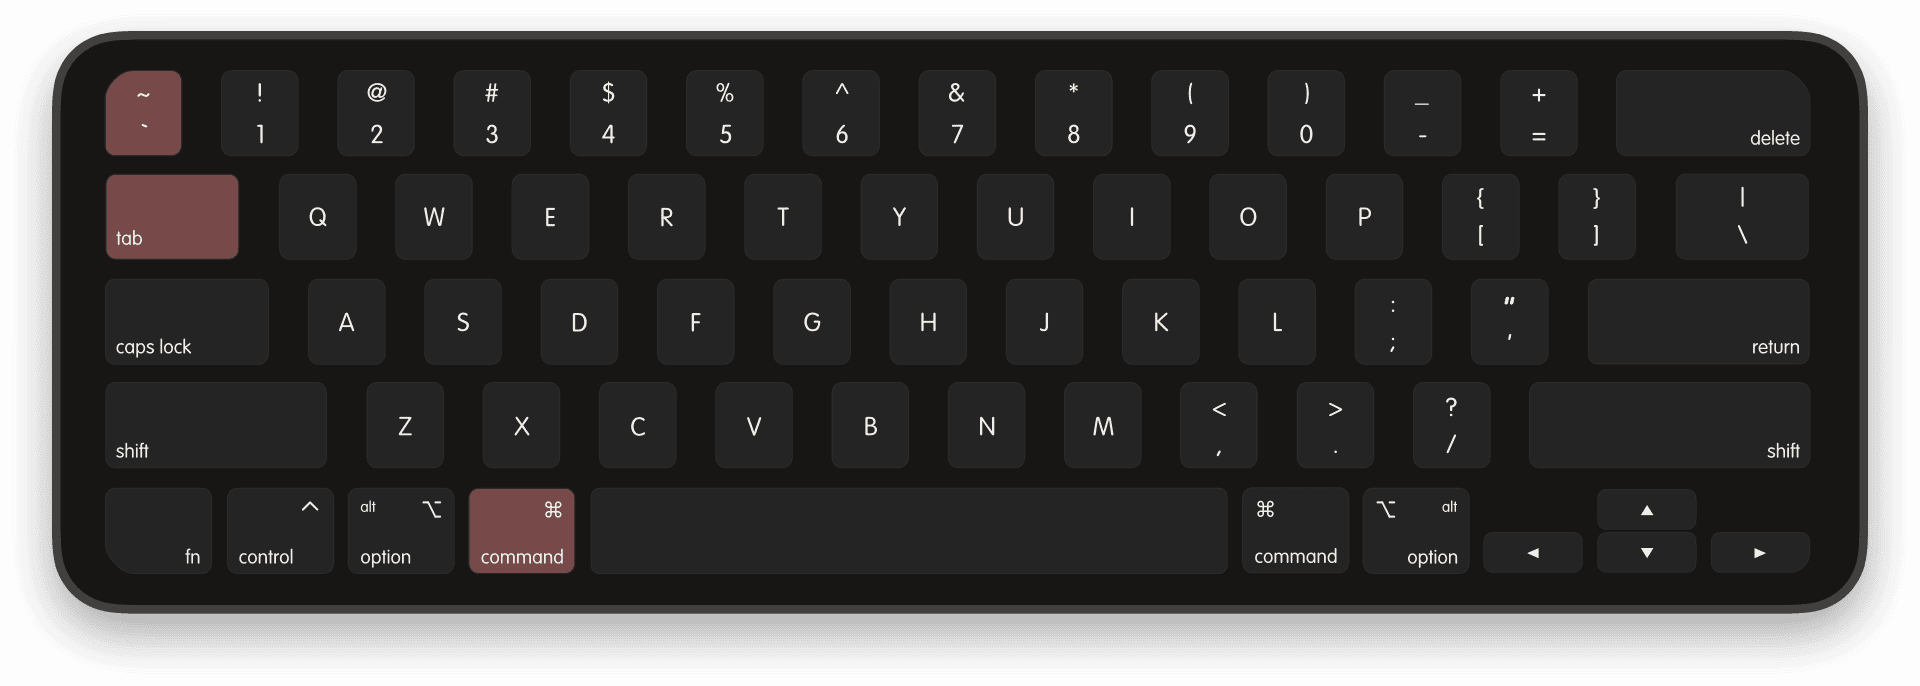 keyboard with command tab and backtick keys highlighted